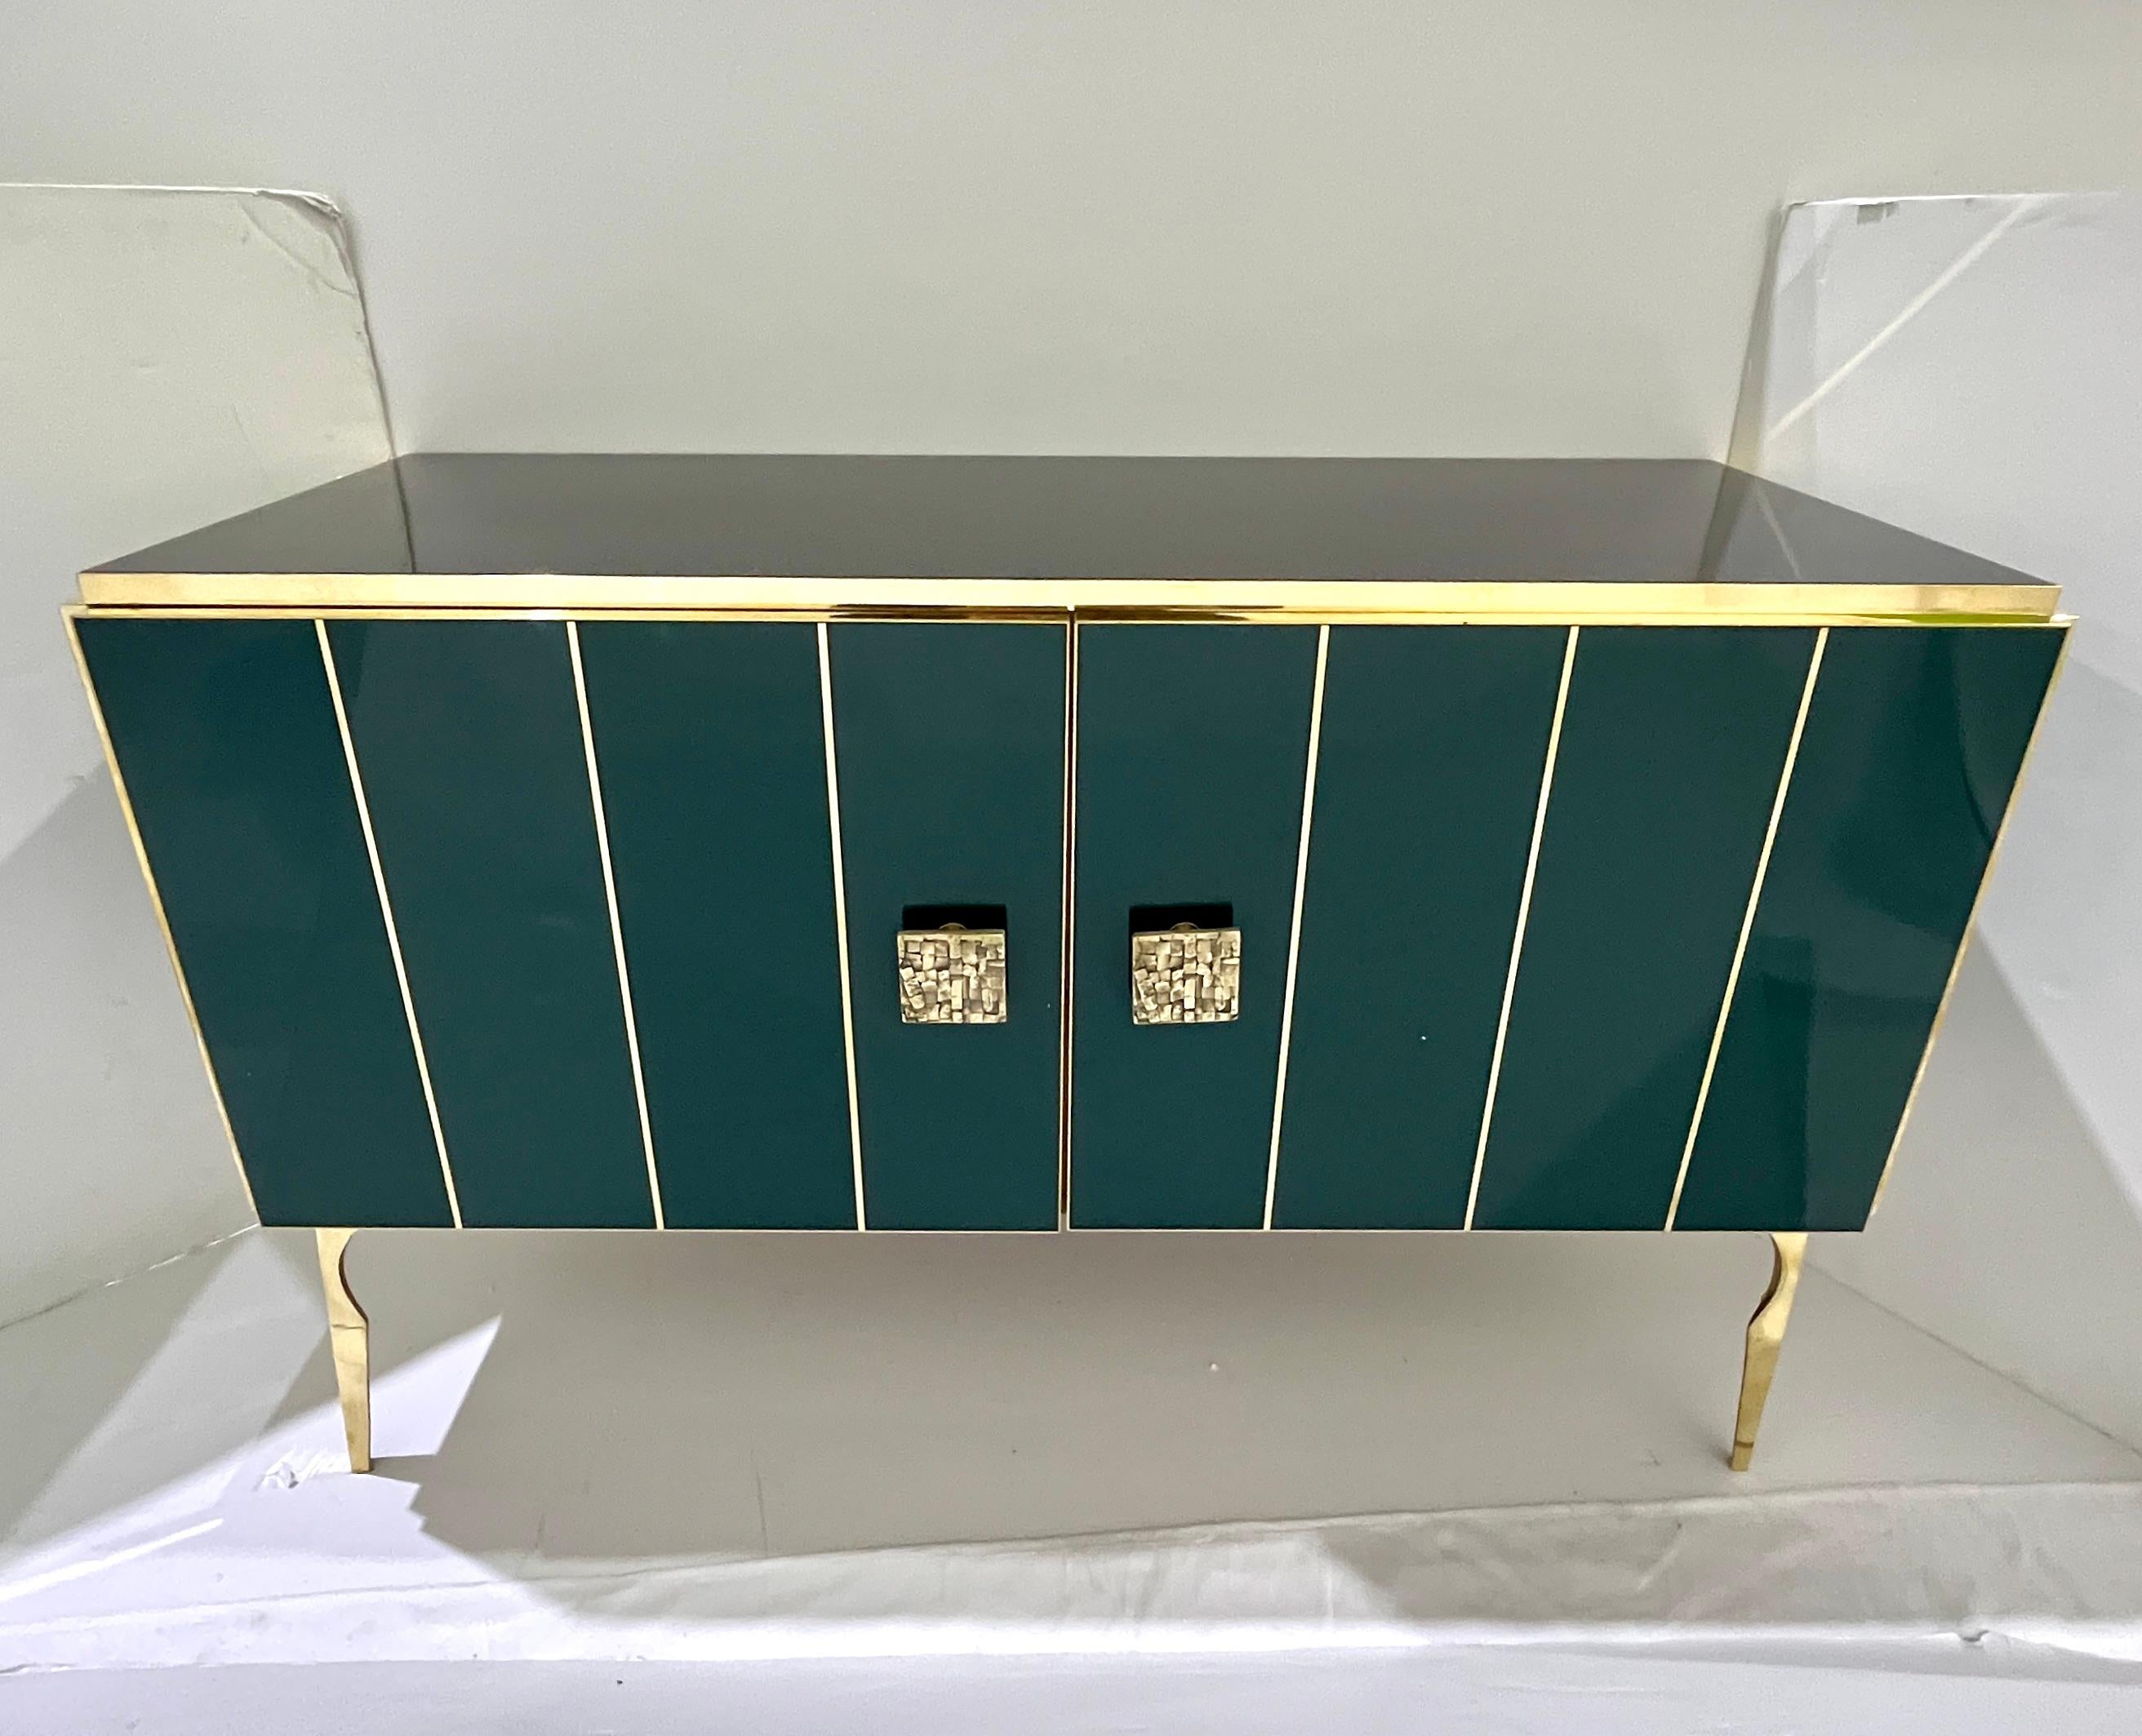 Bring glamour to your interior with this bespoke customizable modern 2-door cabinet/bar, entirely handcrafted in Italy, with a Hollywood Regency feel. The surround is decorated with art glass in a striking hunter bottle green color, striped